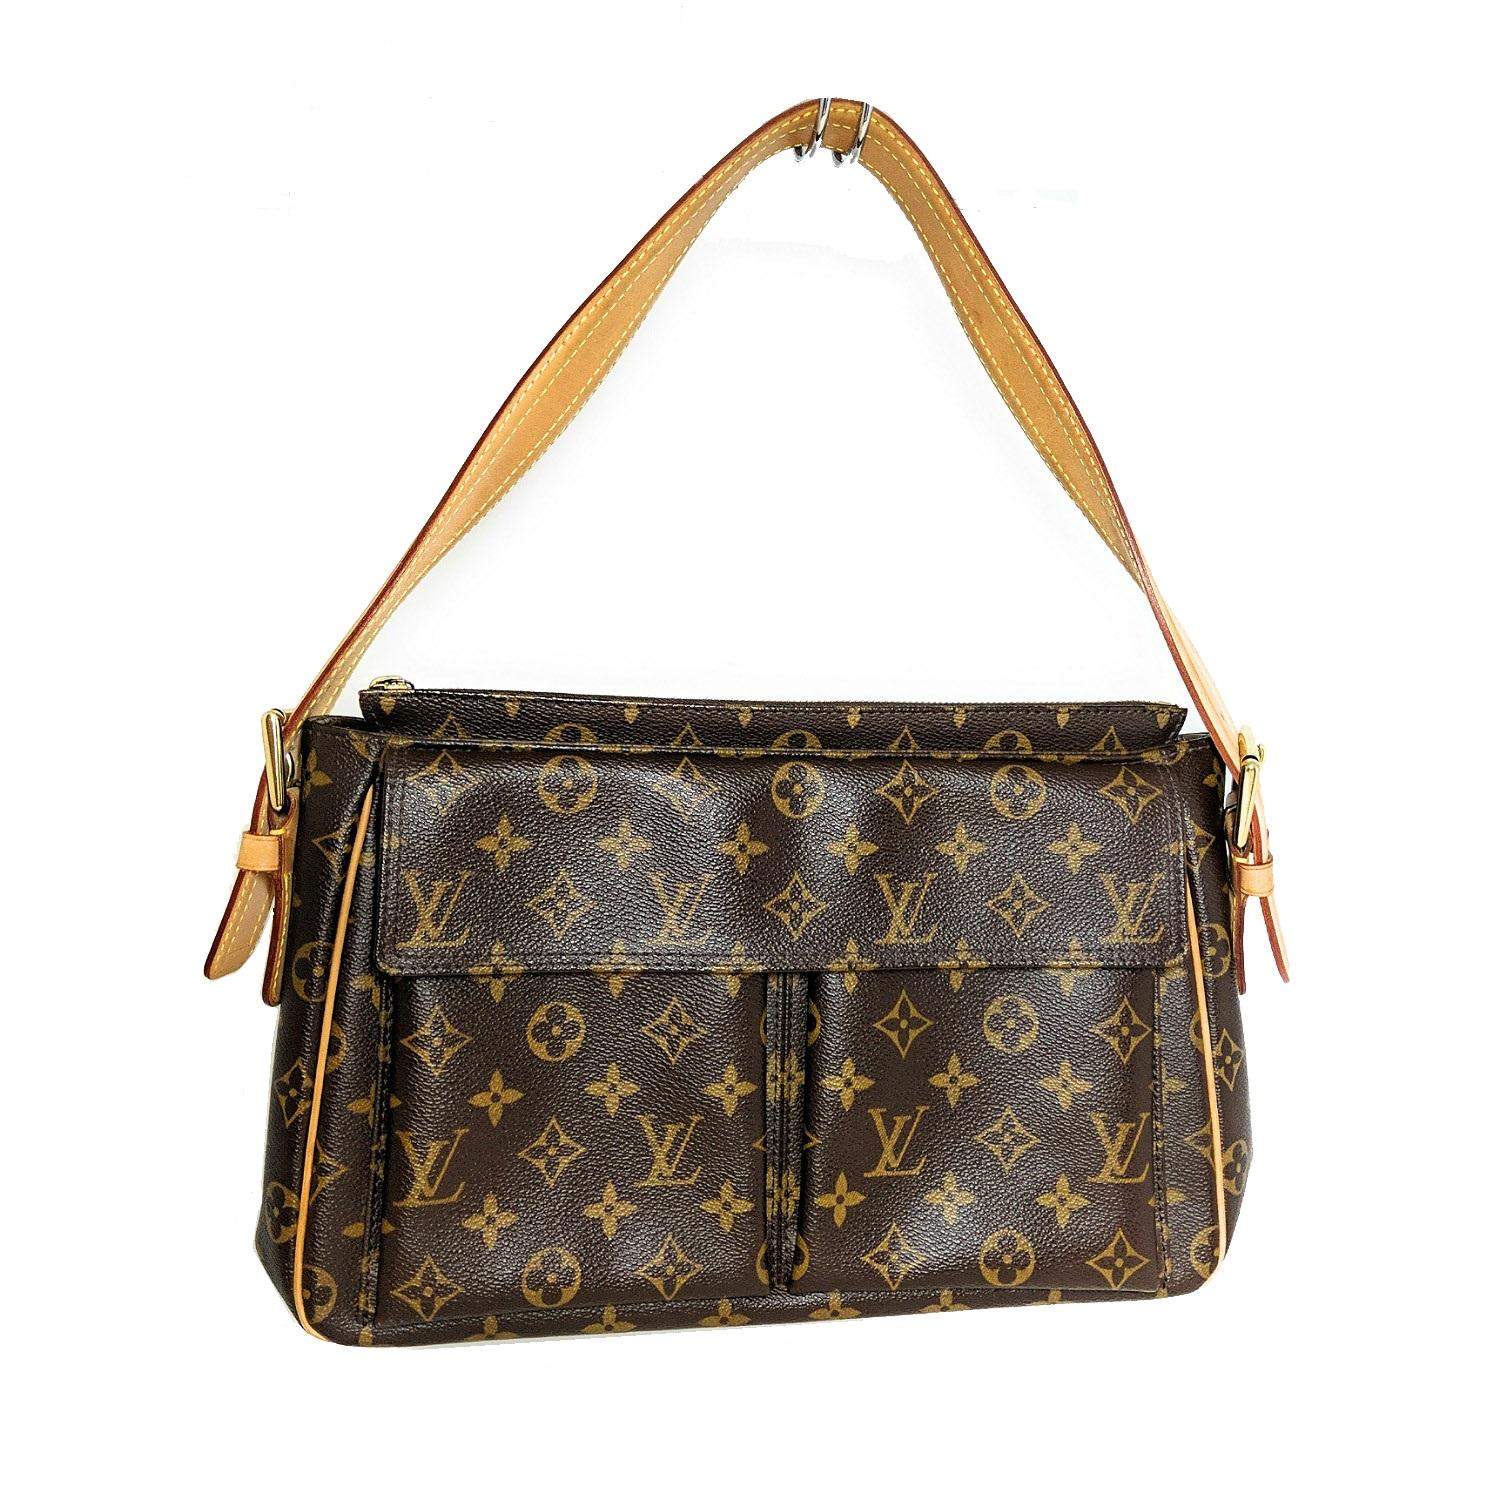 This chic shoulder bag is finely crafted of traditional Louis Vuitton monogram on coated canvas. The bag features two external flap pockets, vachetta cowhide leather trim, and a matching, adjustable shoulder strap, with polished brass hardware. The